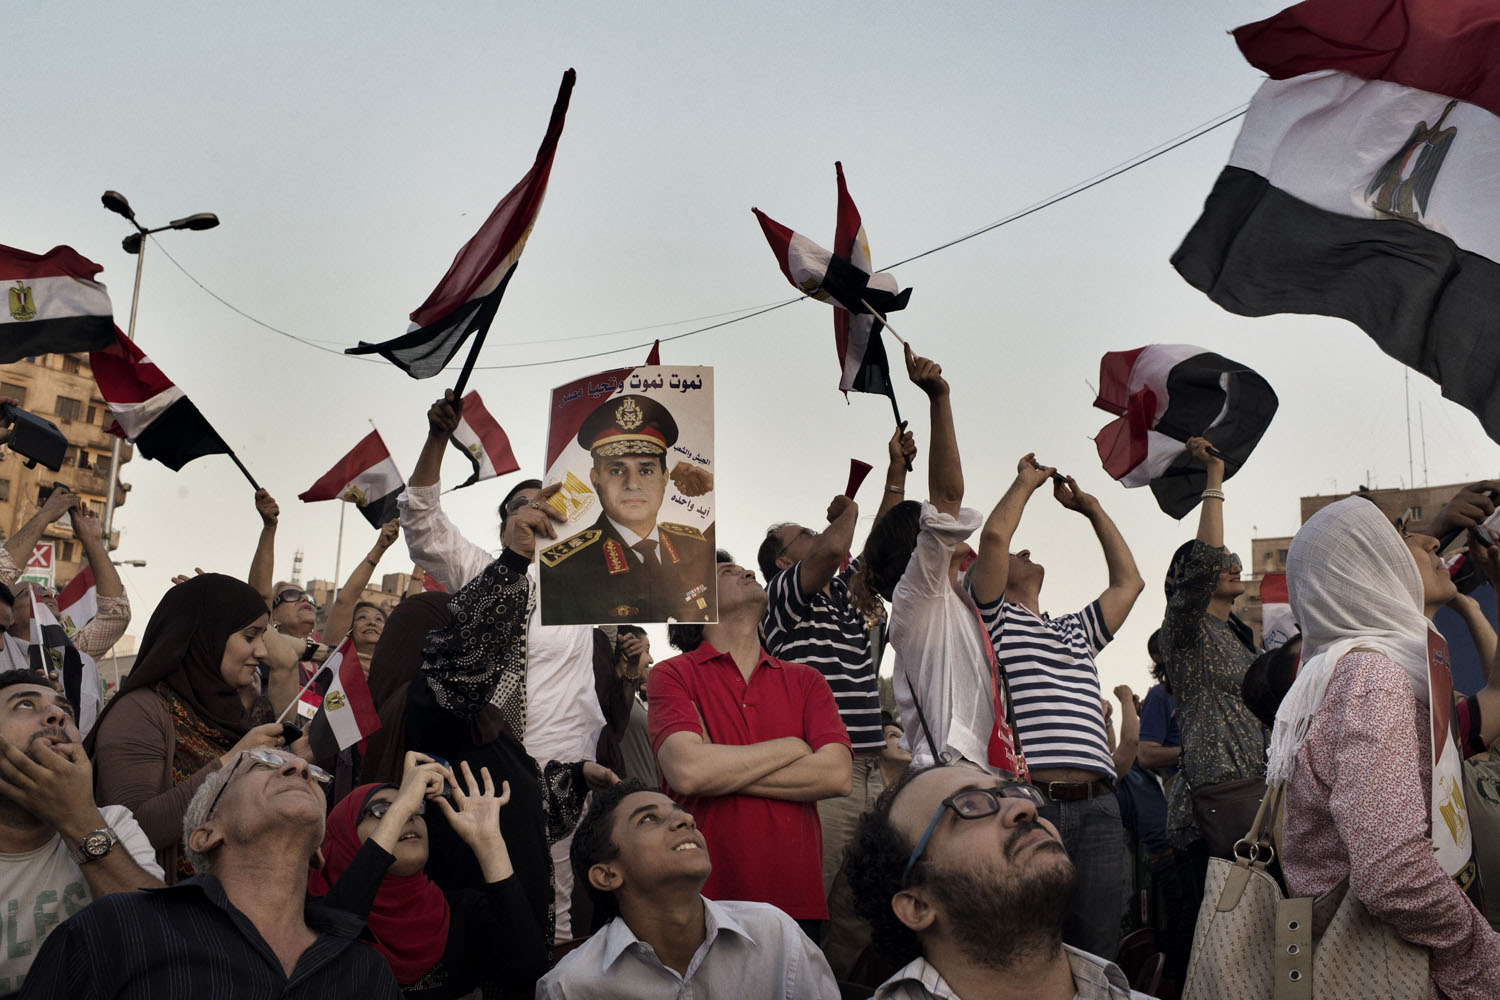 July 7, 2013. The military, which has sided with the anti-Morsi demonstrators, did its part to stoke patriotic passions. Each time military helicopters and jets flew above the square, demonstrators cheered. Some held up posters of army chief Gen. Abdel Fattah al-Sisi.